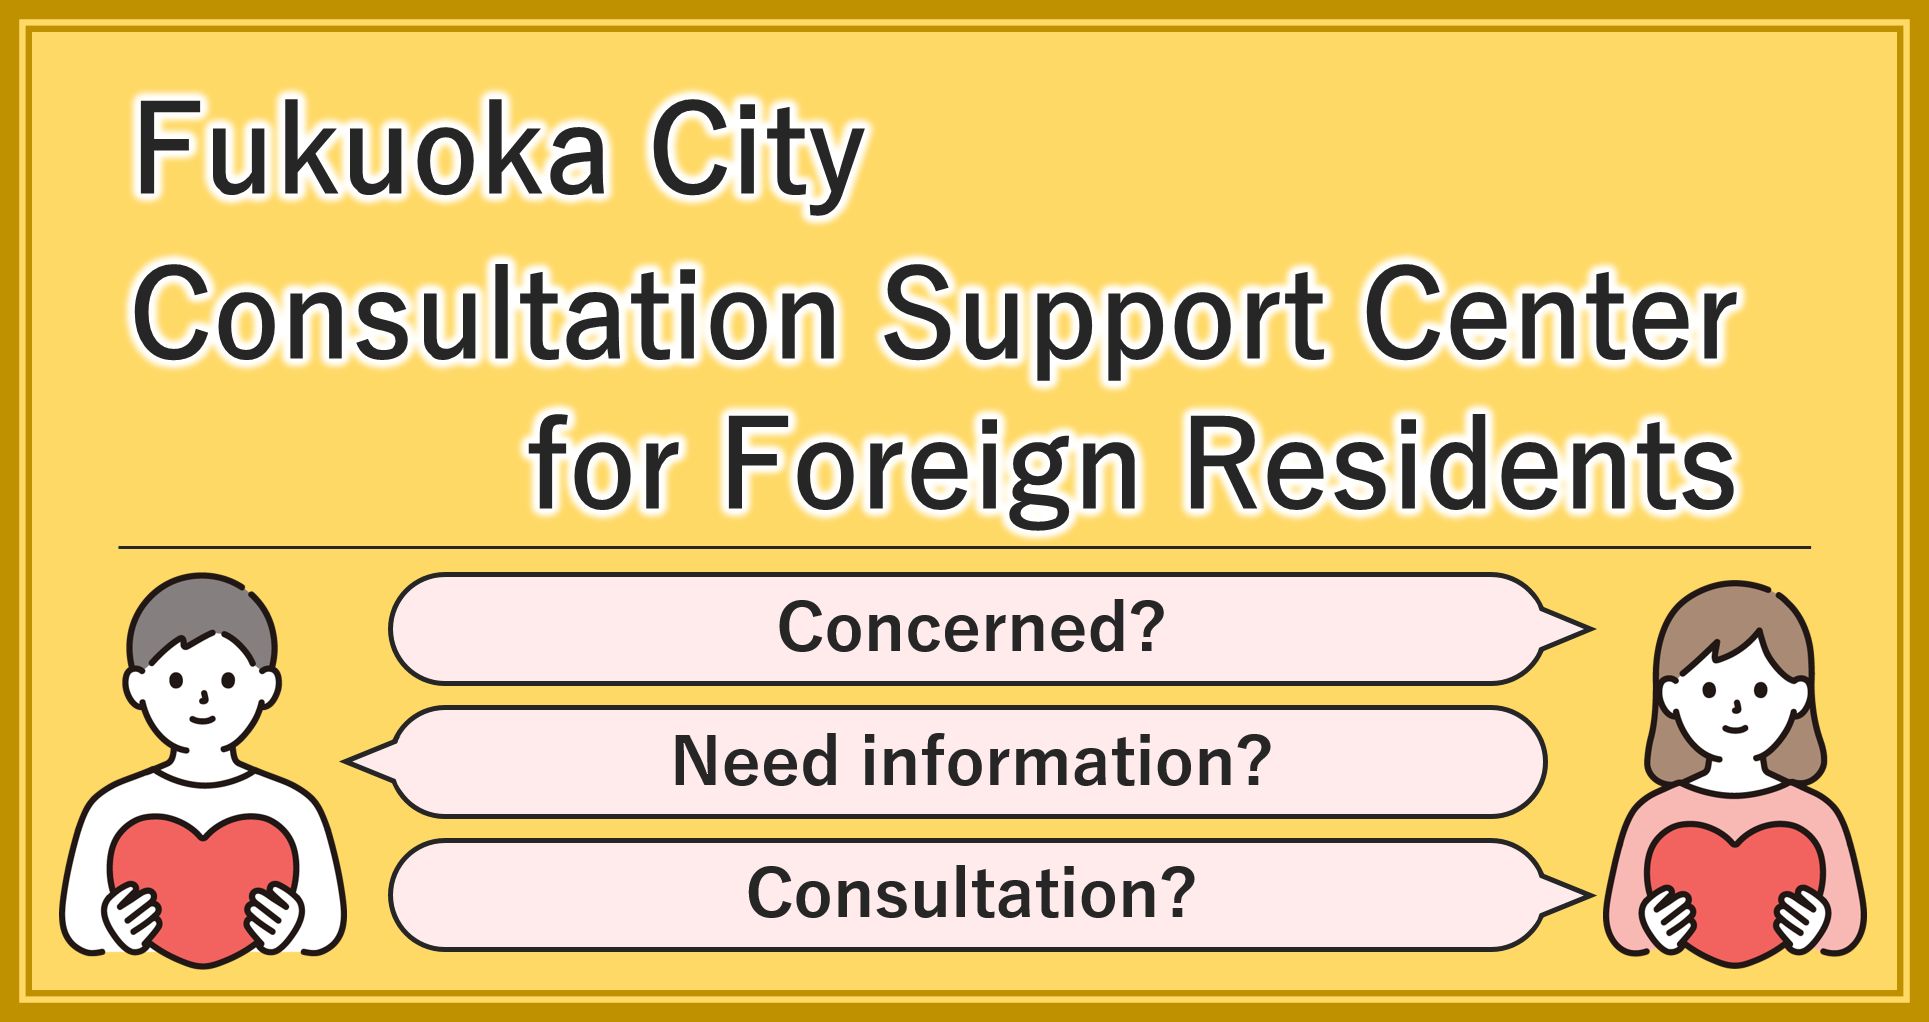 Concerned? Need information? Consultation? Fukuoka City Consultation Support Center for Foreign Residents